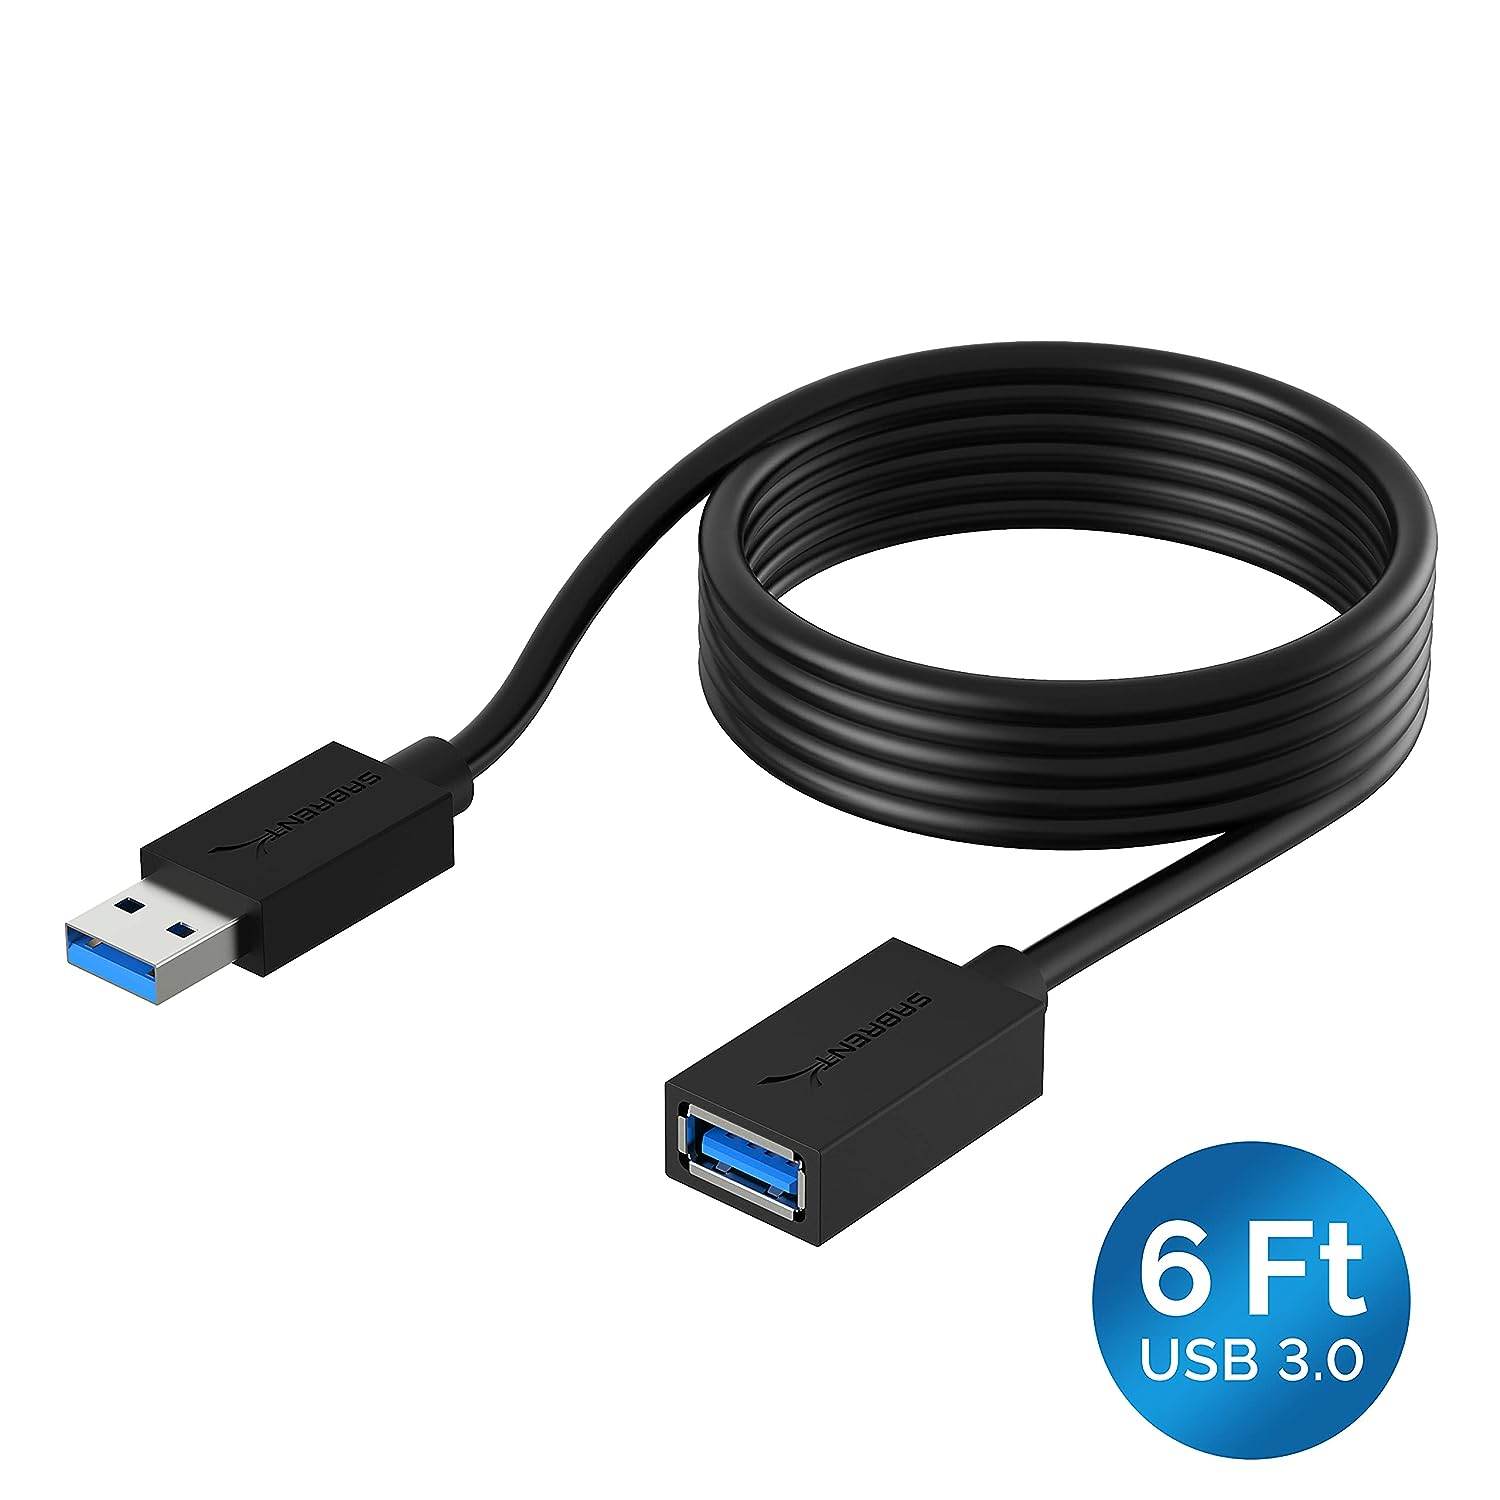 SABRENT 22AWG USB 3.0 Extension Cable A Male to A Female [Black] 6 Feet (CB-3060)